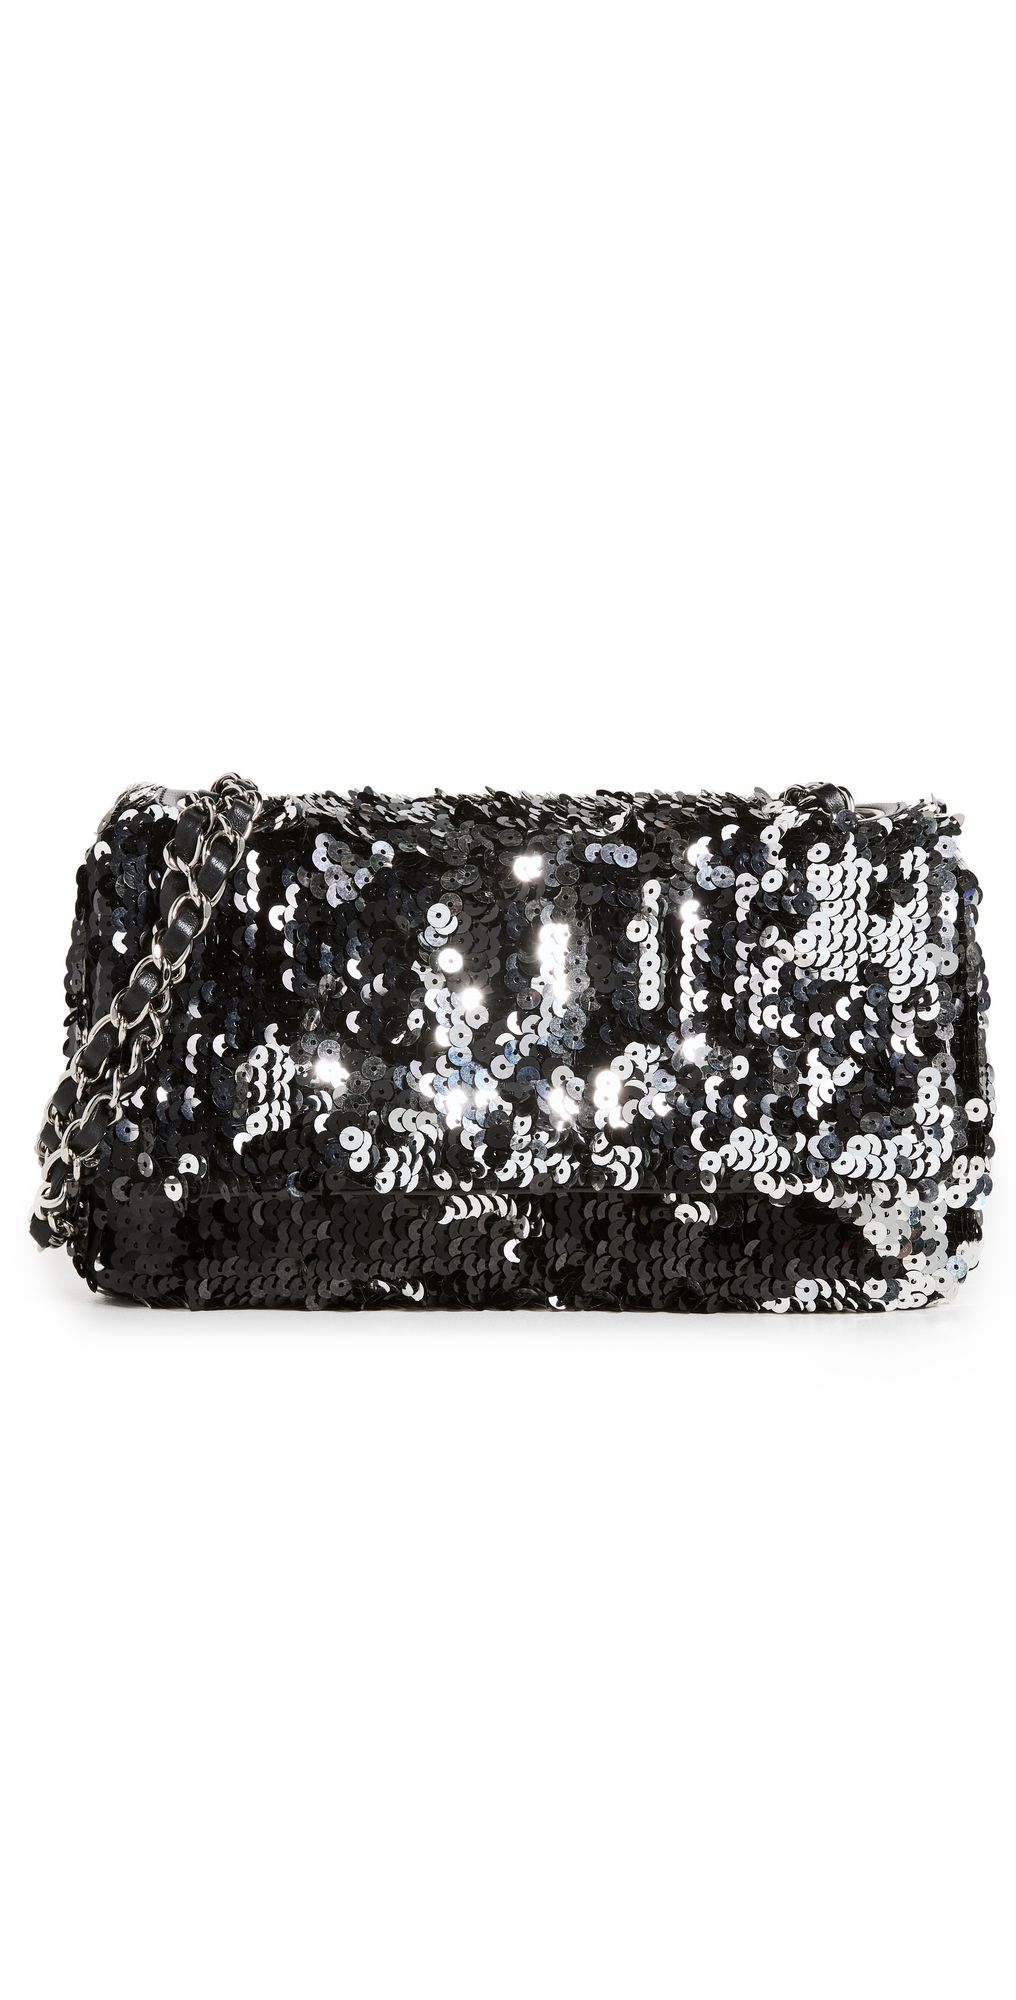 Chanel Limited Edition Sequin Summer Nights Bag | Shopbop